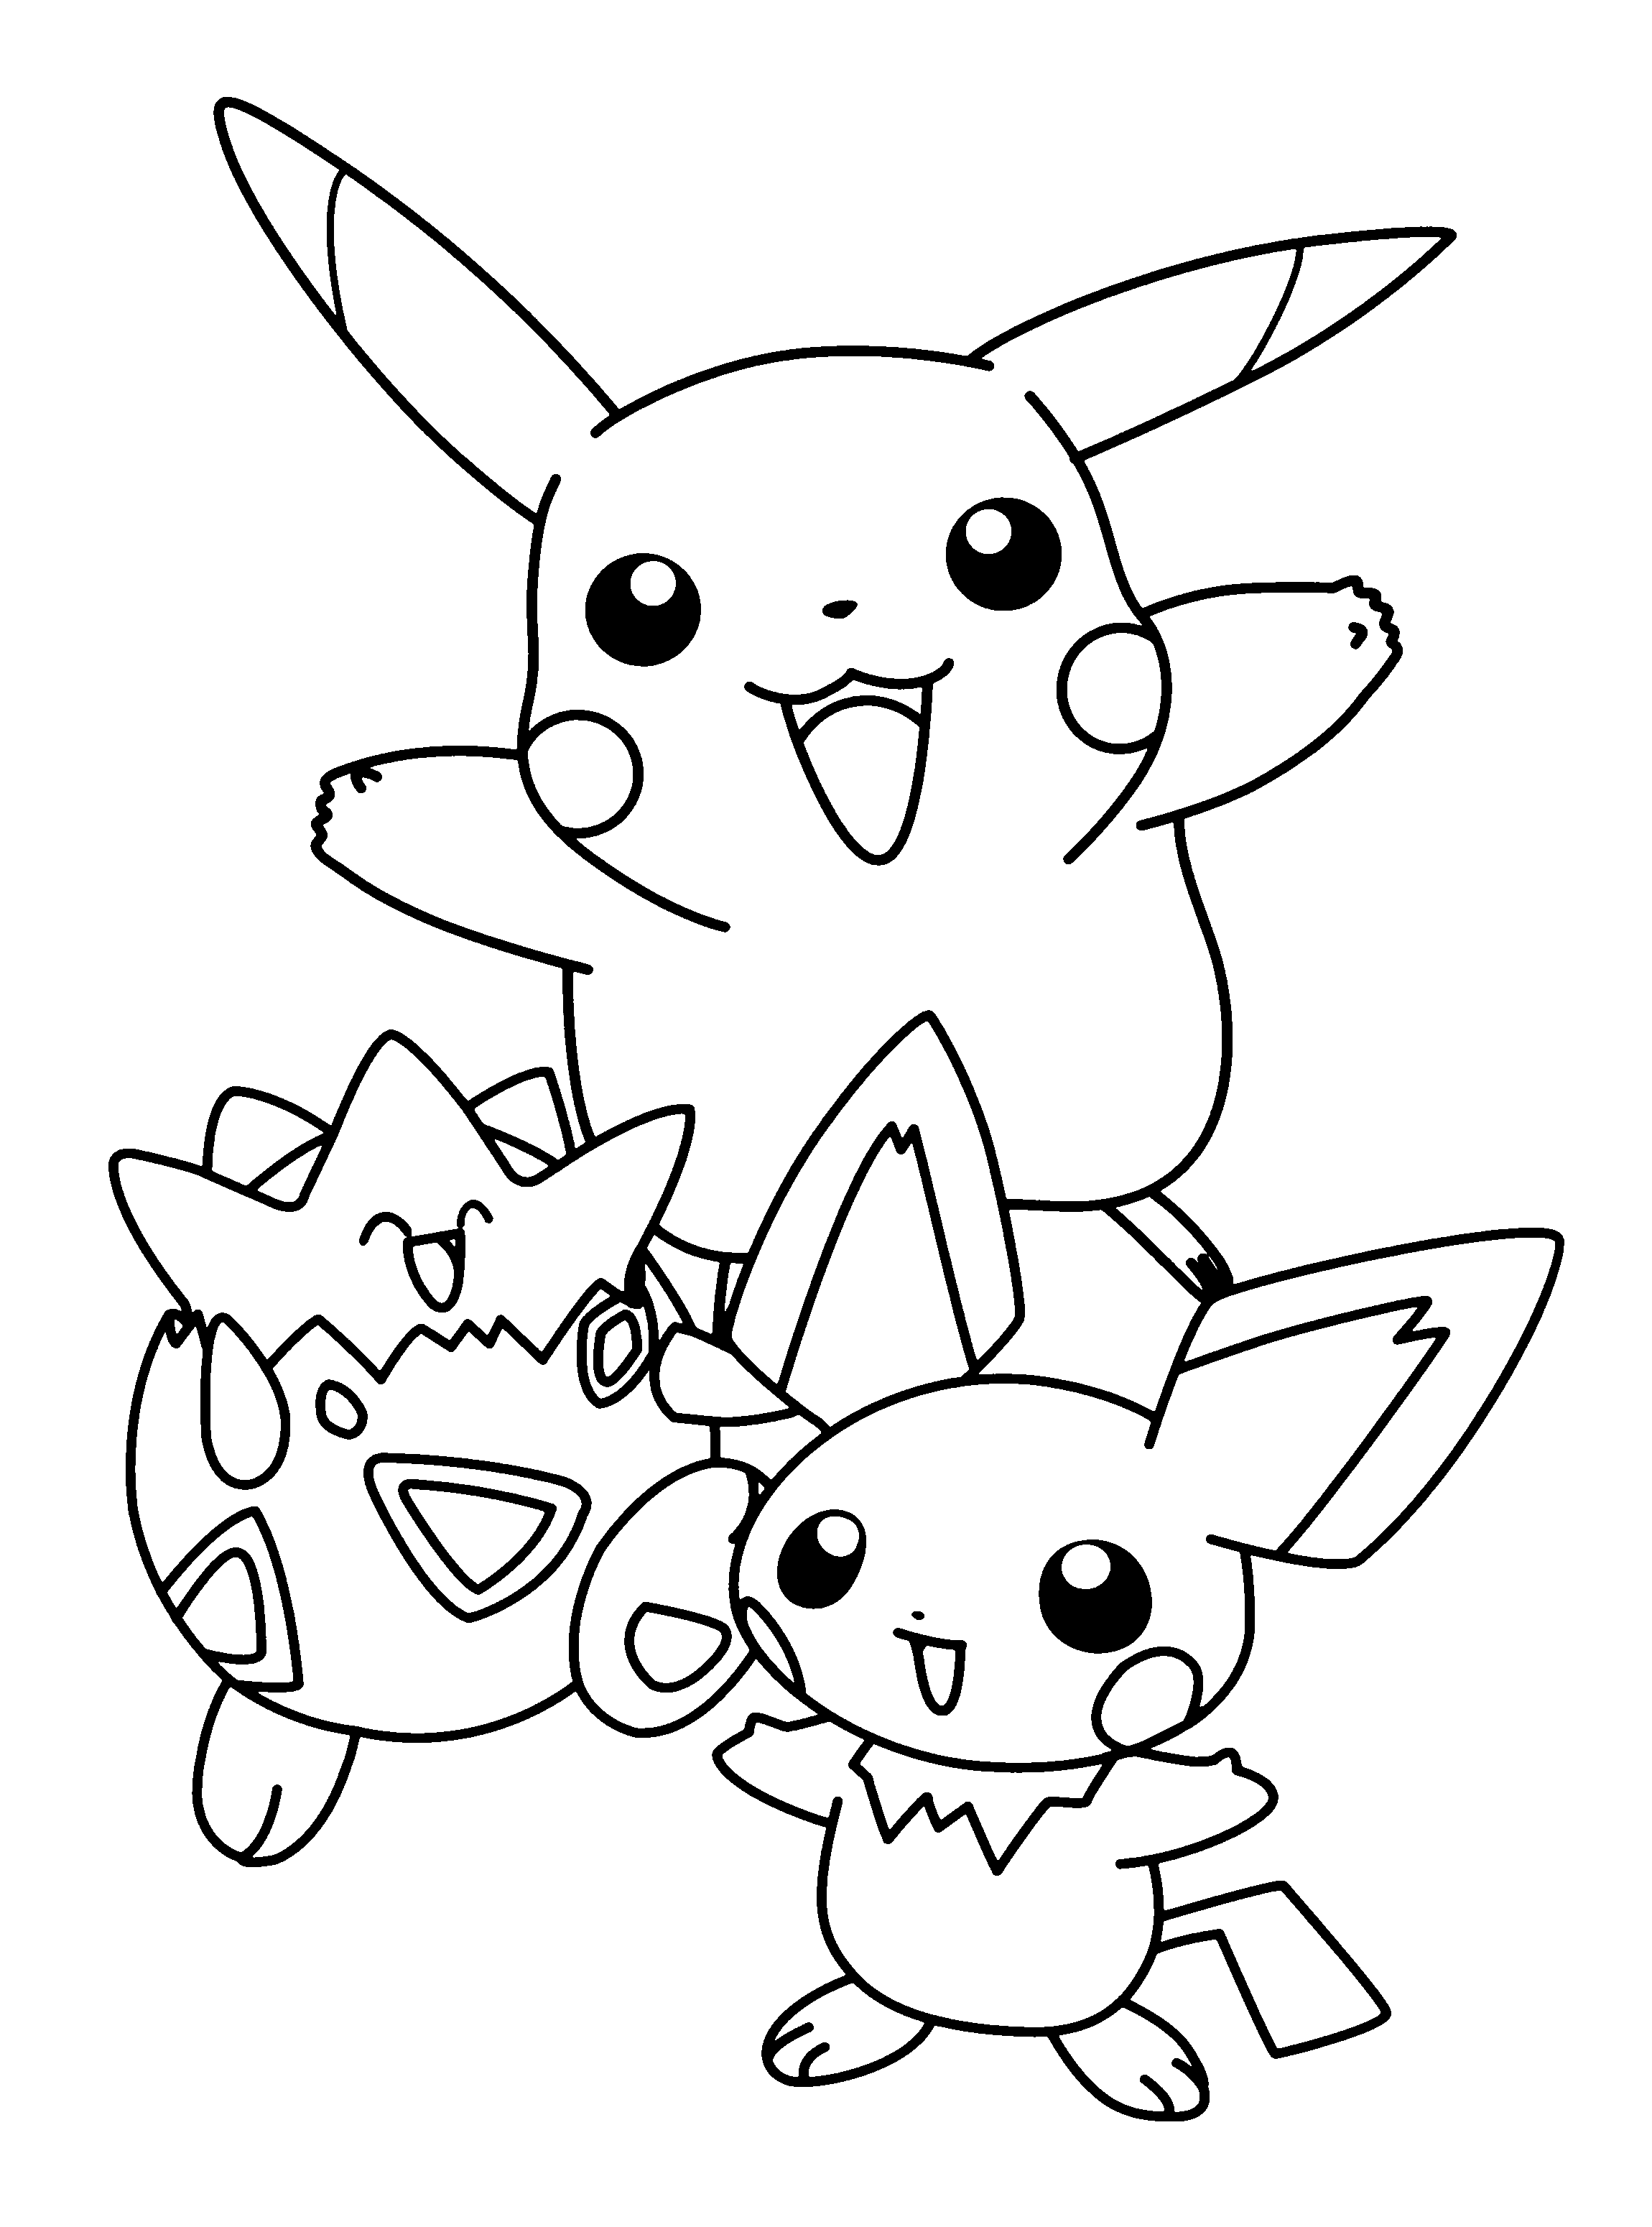 Pokemon Free To Color For Kids All Pokemon Coloring Pages Kids Coloring Pages Click on the free pokemon colour page you would like to print, if you print them all you can make your own. pokemon coloring pages kids coloring pages